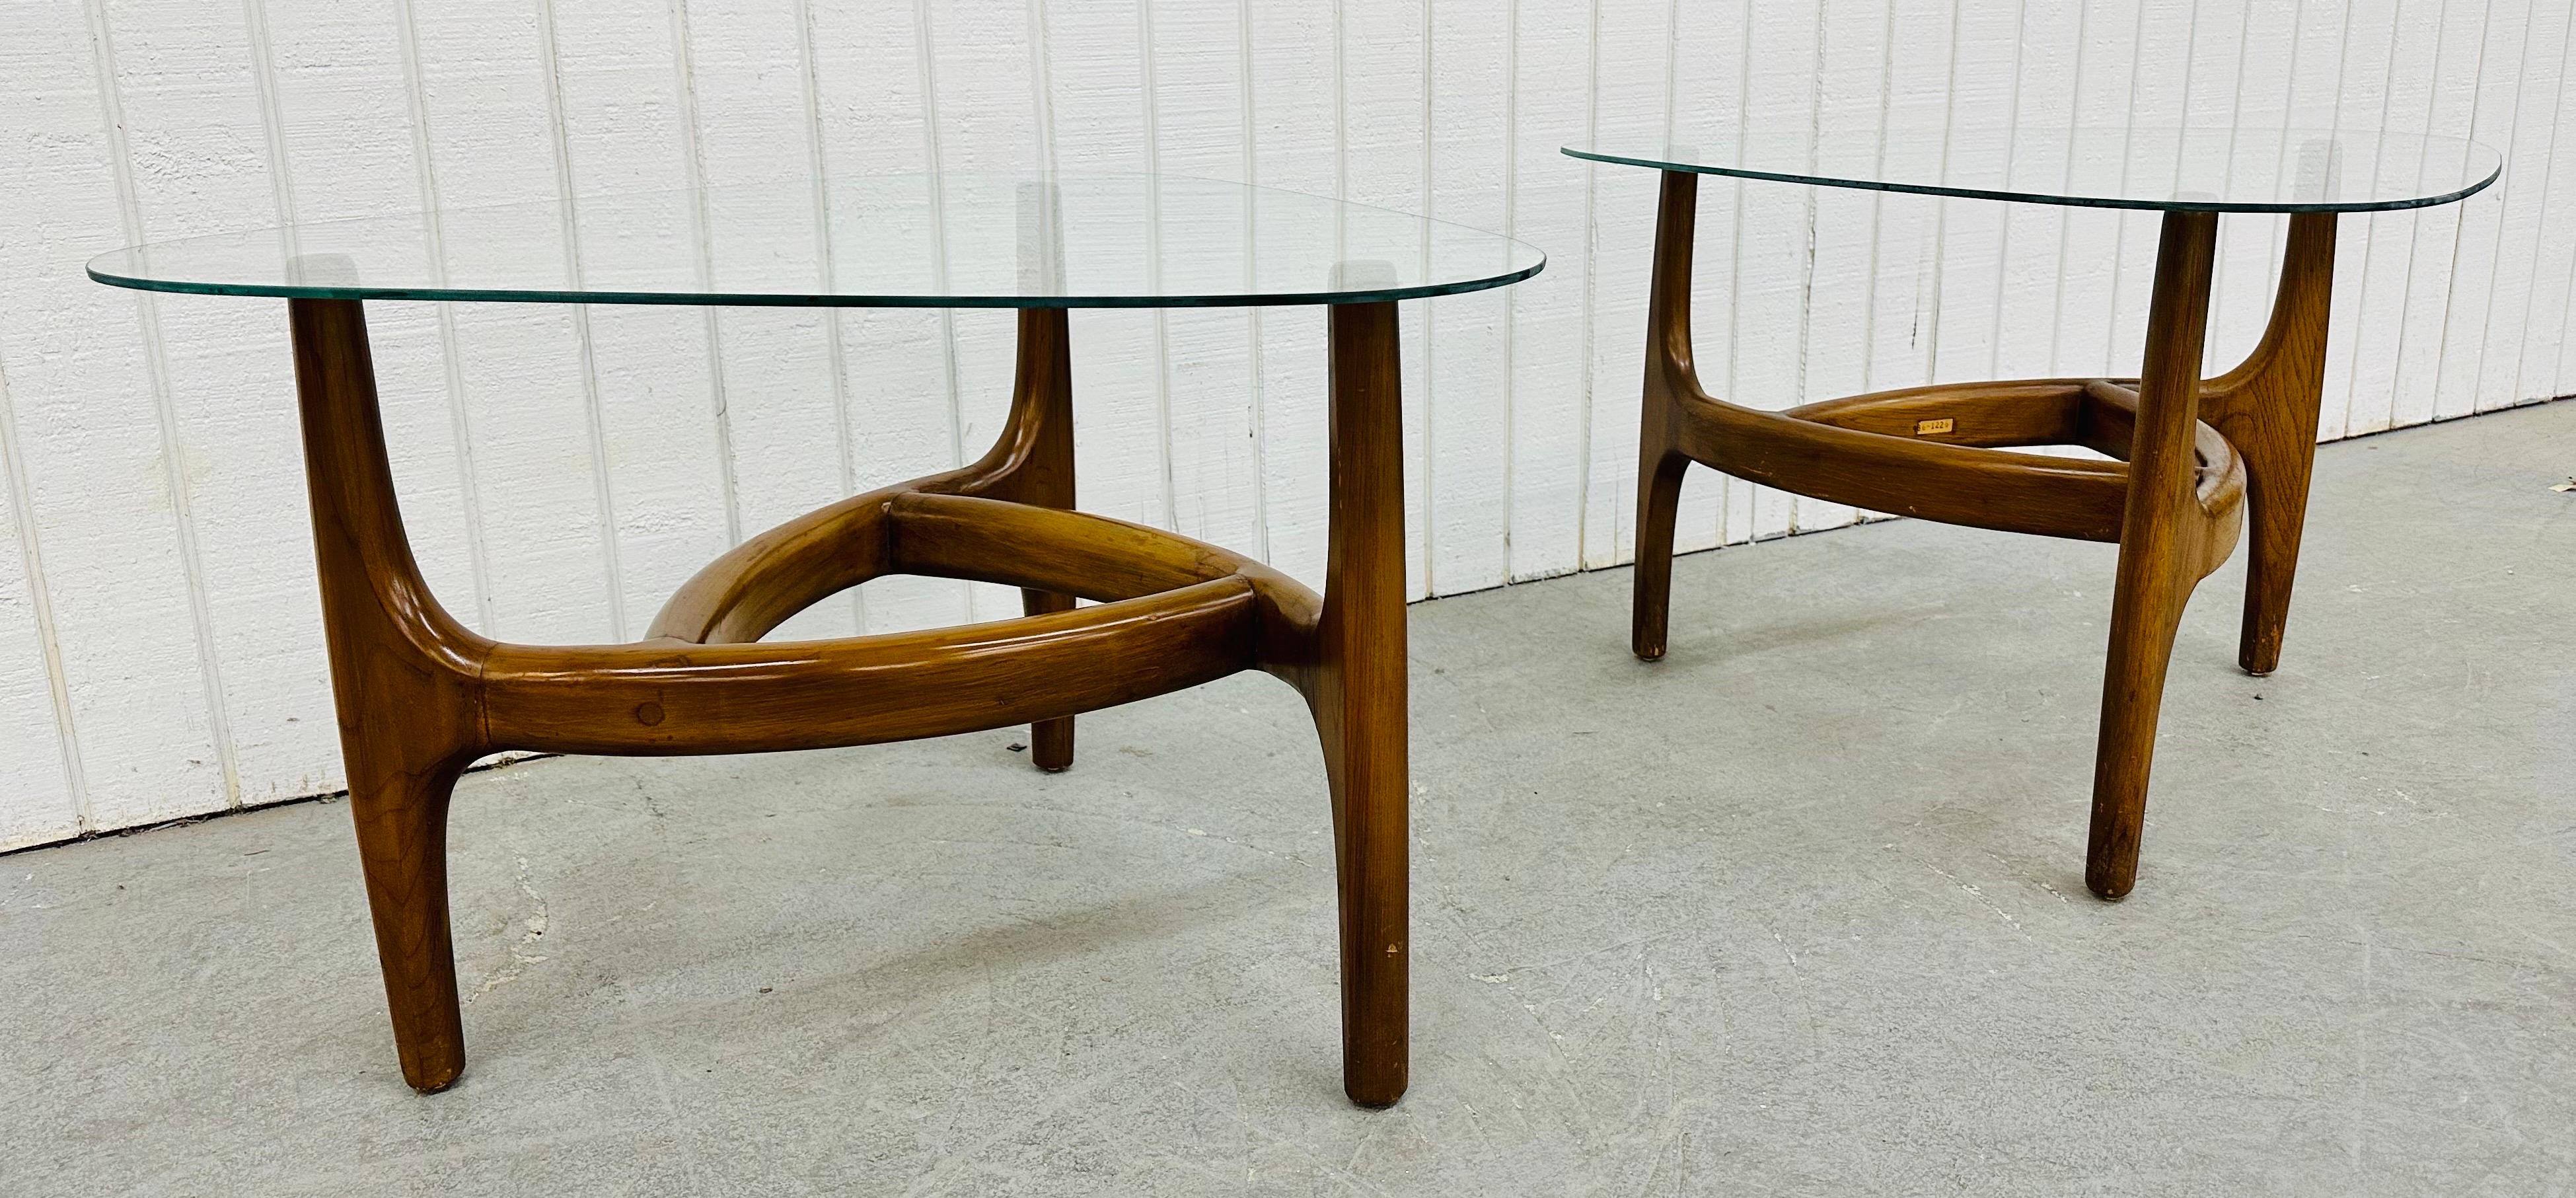 20th Century Mid-Century Modern Sculpted Walnut Glass Top Side Tables - Set of 2 For Sale